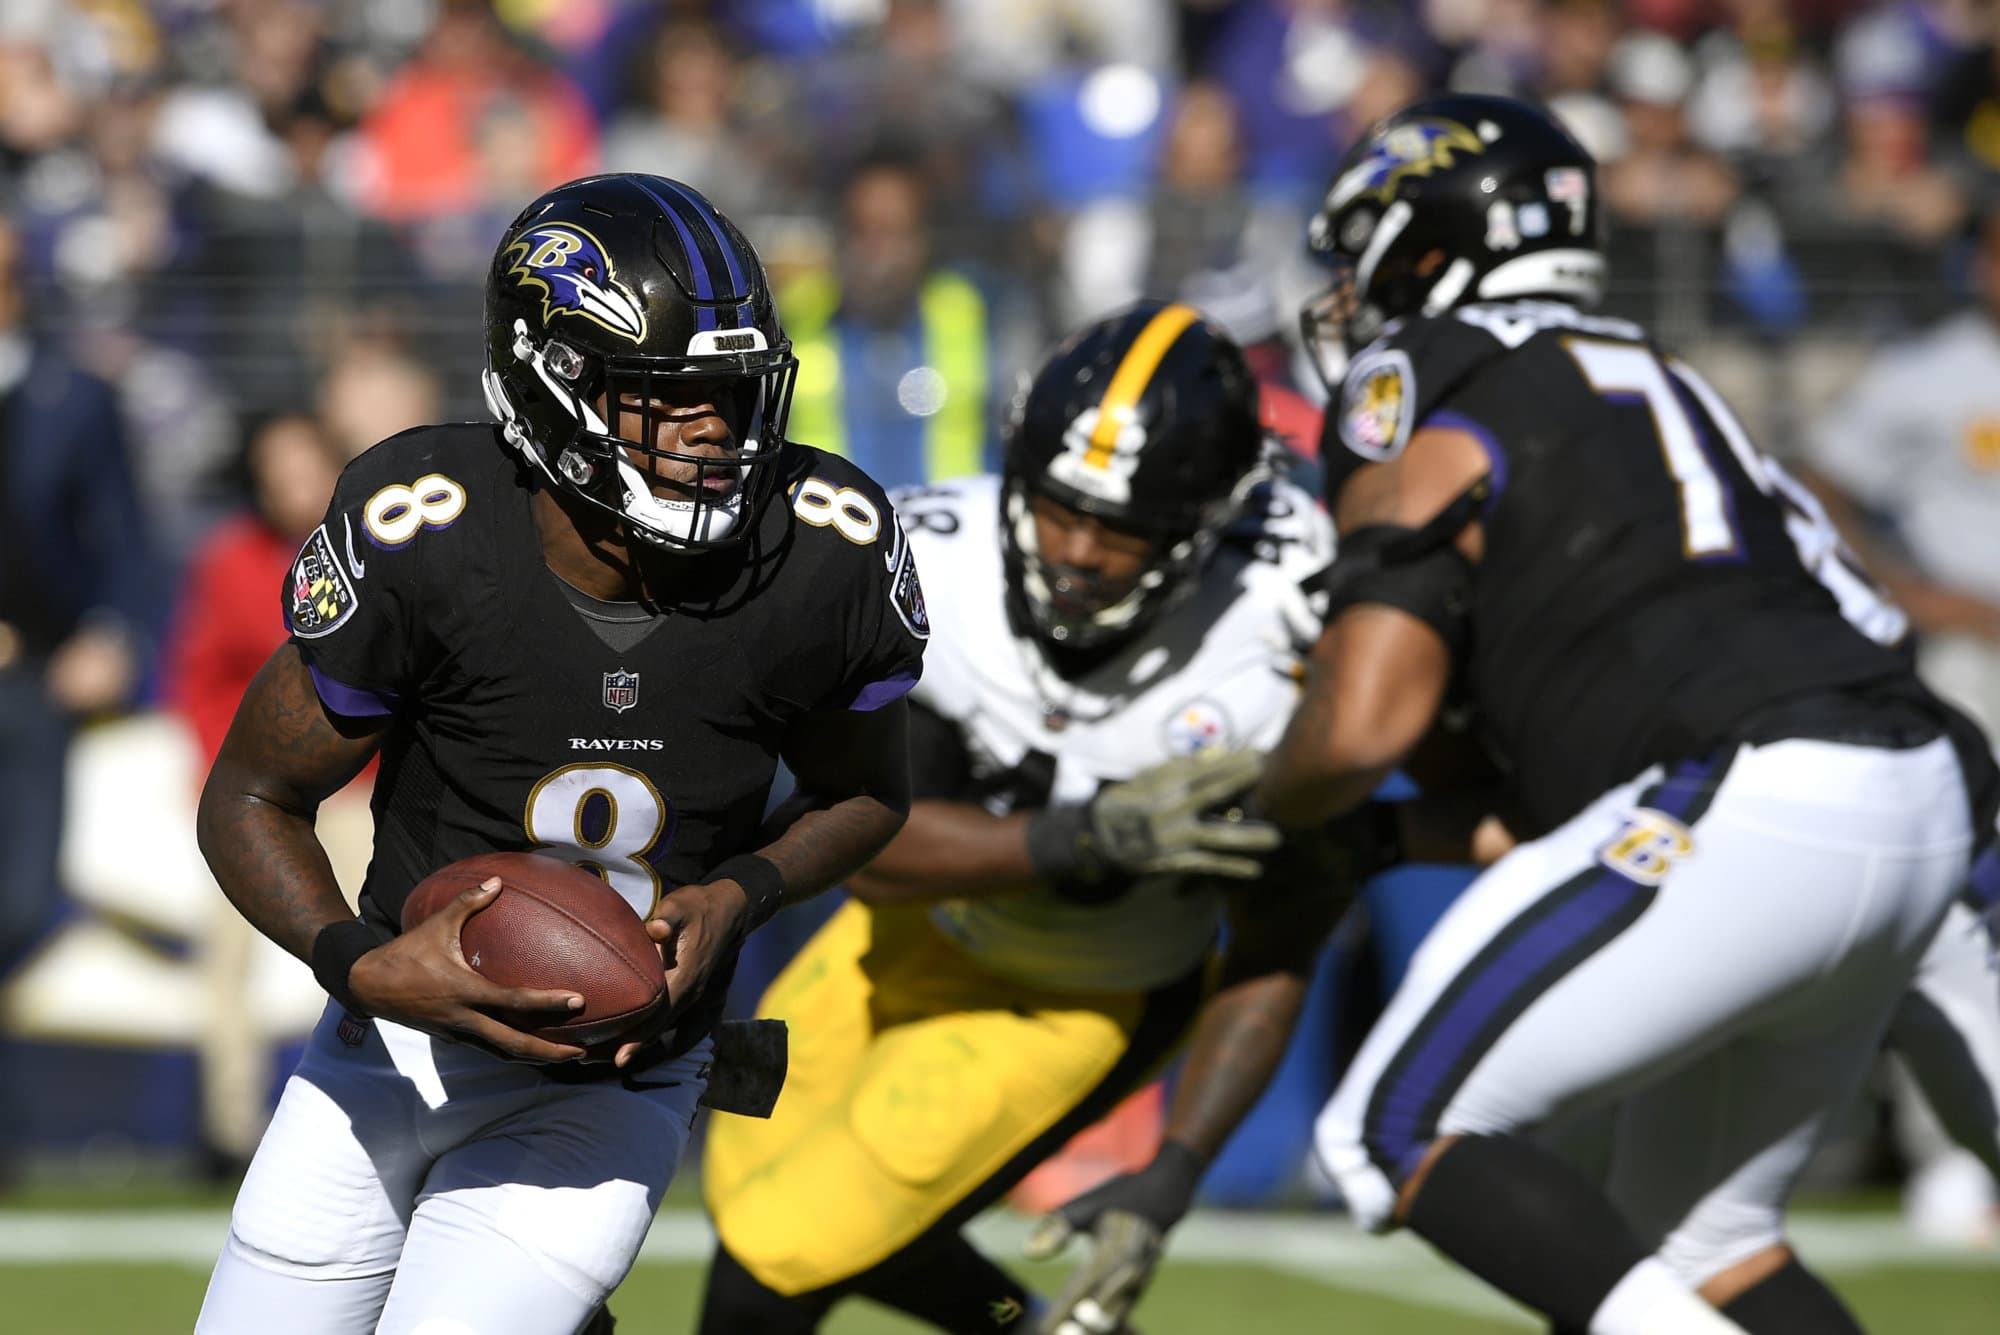 FILE - In this Nov. 4, 2018, file photo ,Baltimore Ravens quarterback Lamar Jackson (8) rushes the ball in the first half of an NFL football game against the Pittsburgh Steelers in Baltimore. Joe Flacco's hip injury means extra practice time for Ravens backup quarterbacks Lamar Jackson and Robert Griffin III, and perhaps one of them will make their first start of the season.  (AP Photo/Nick Wass, File)